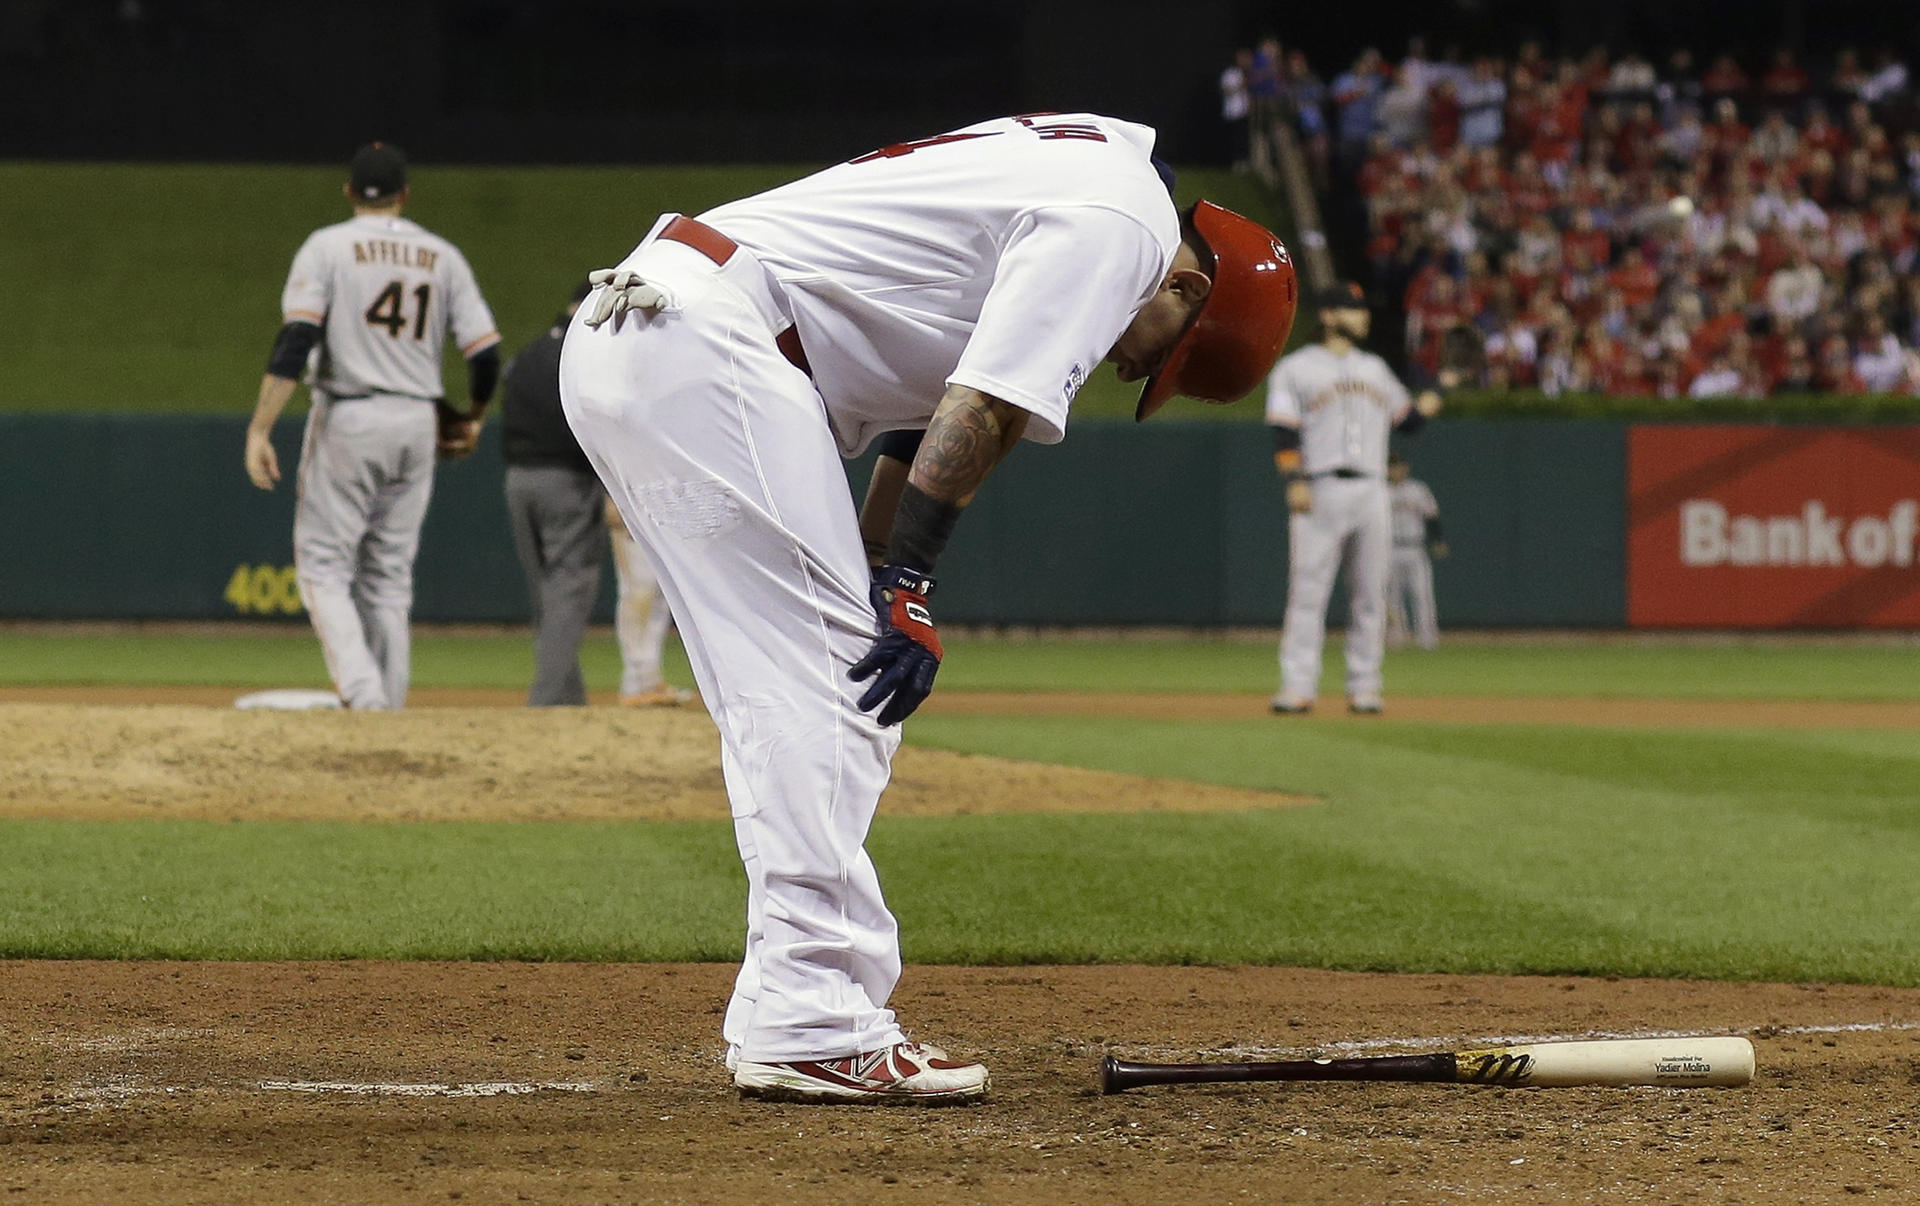 Cardinals' star catcher Yadier Molina is injured in the sixth inning against the Giants. Photos: AP